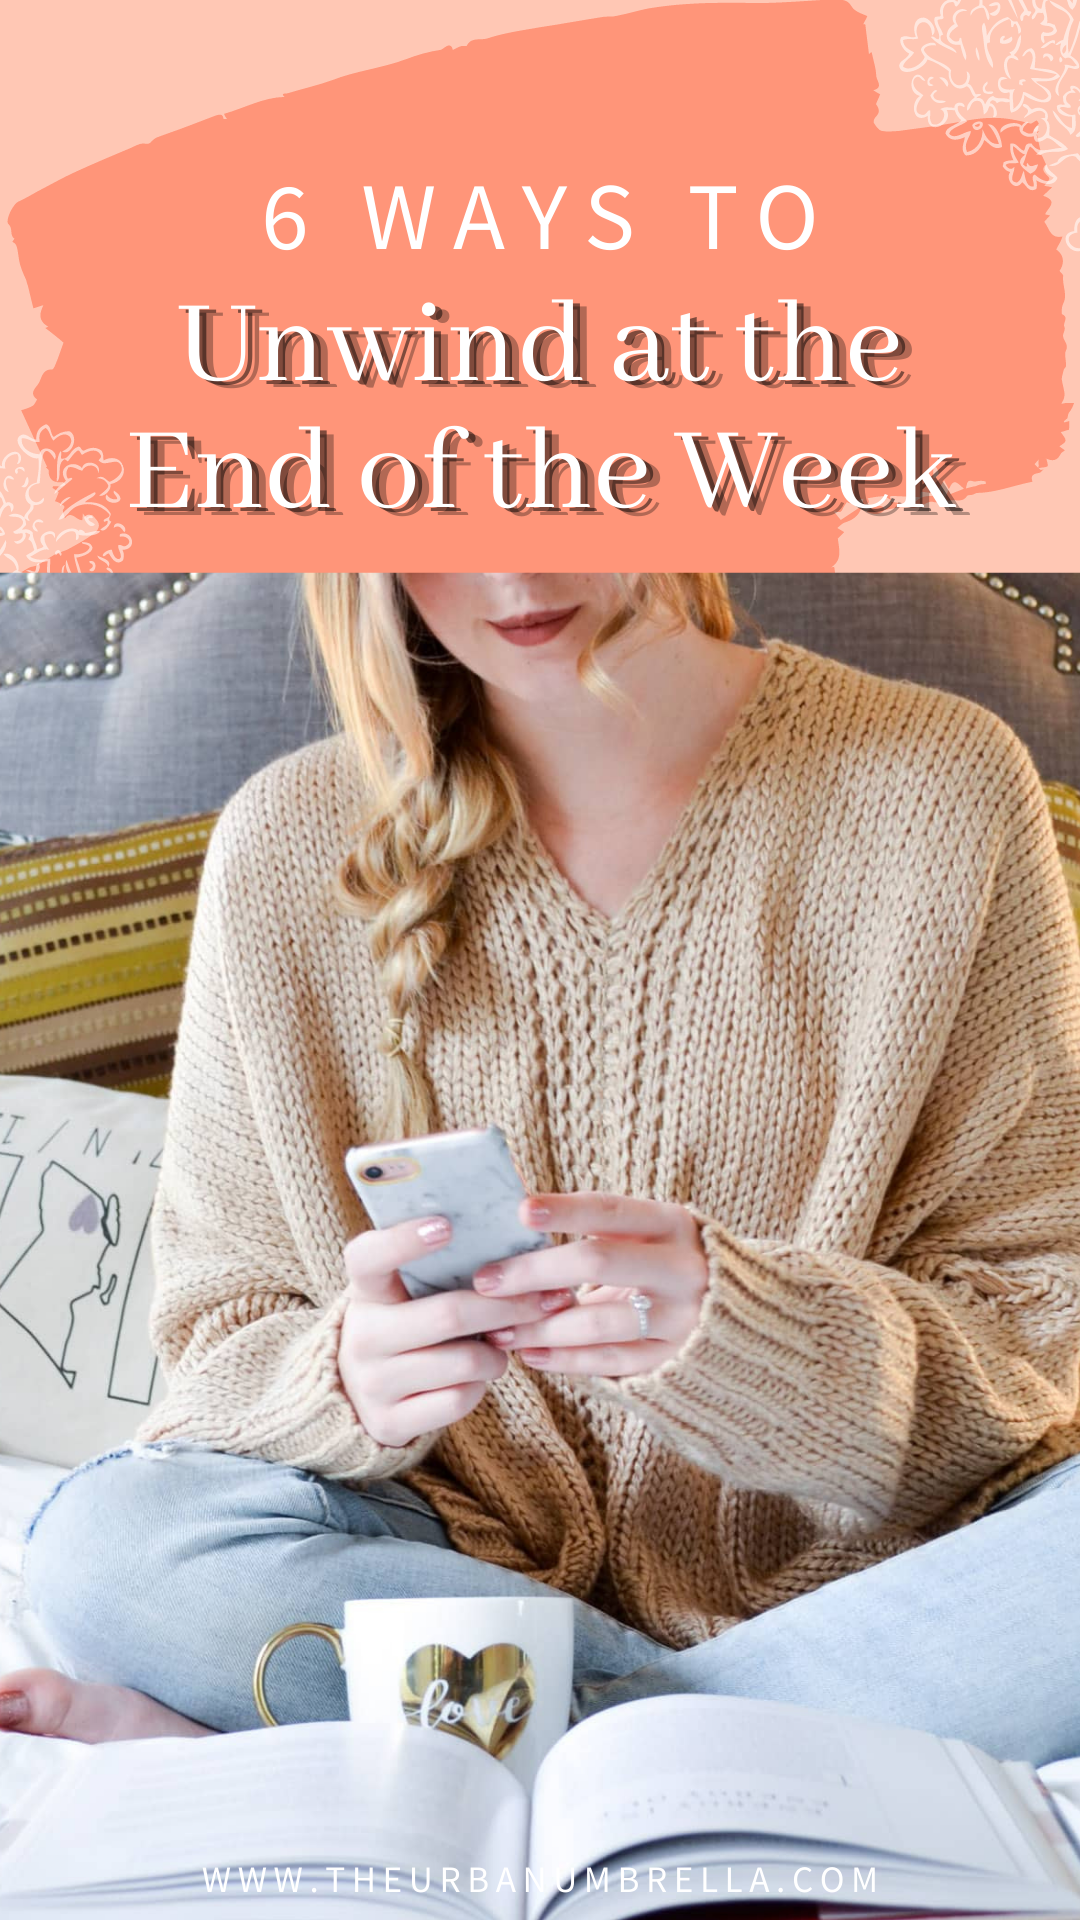 Friday Night Faves | 6 Ways to Unwind at the End of the Week